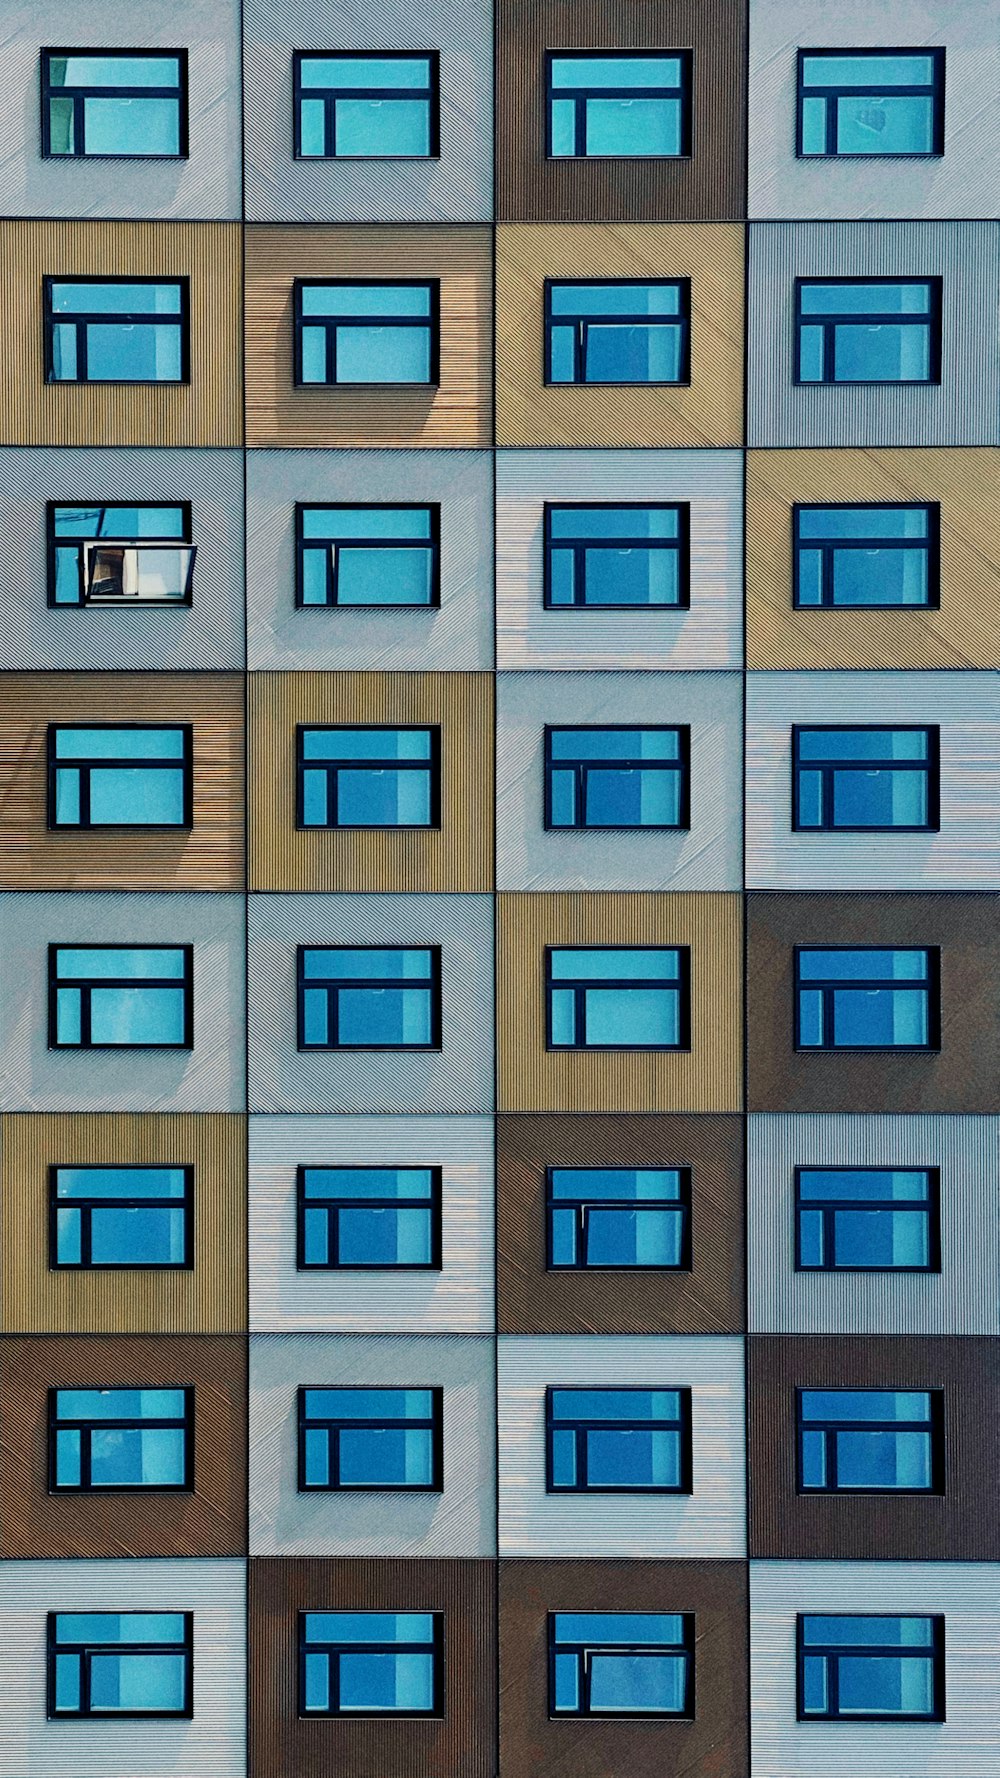 a multicolored image of a building with many windows